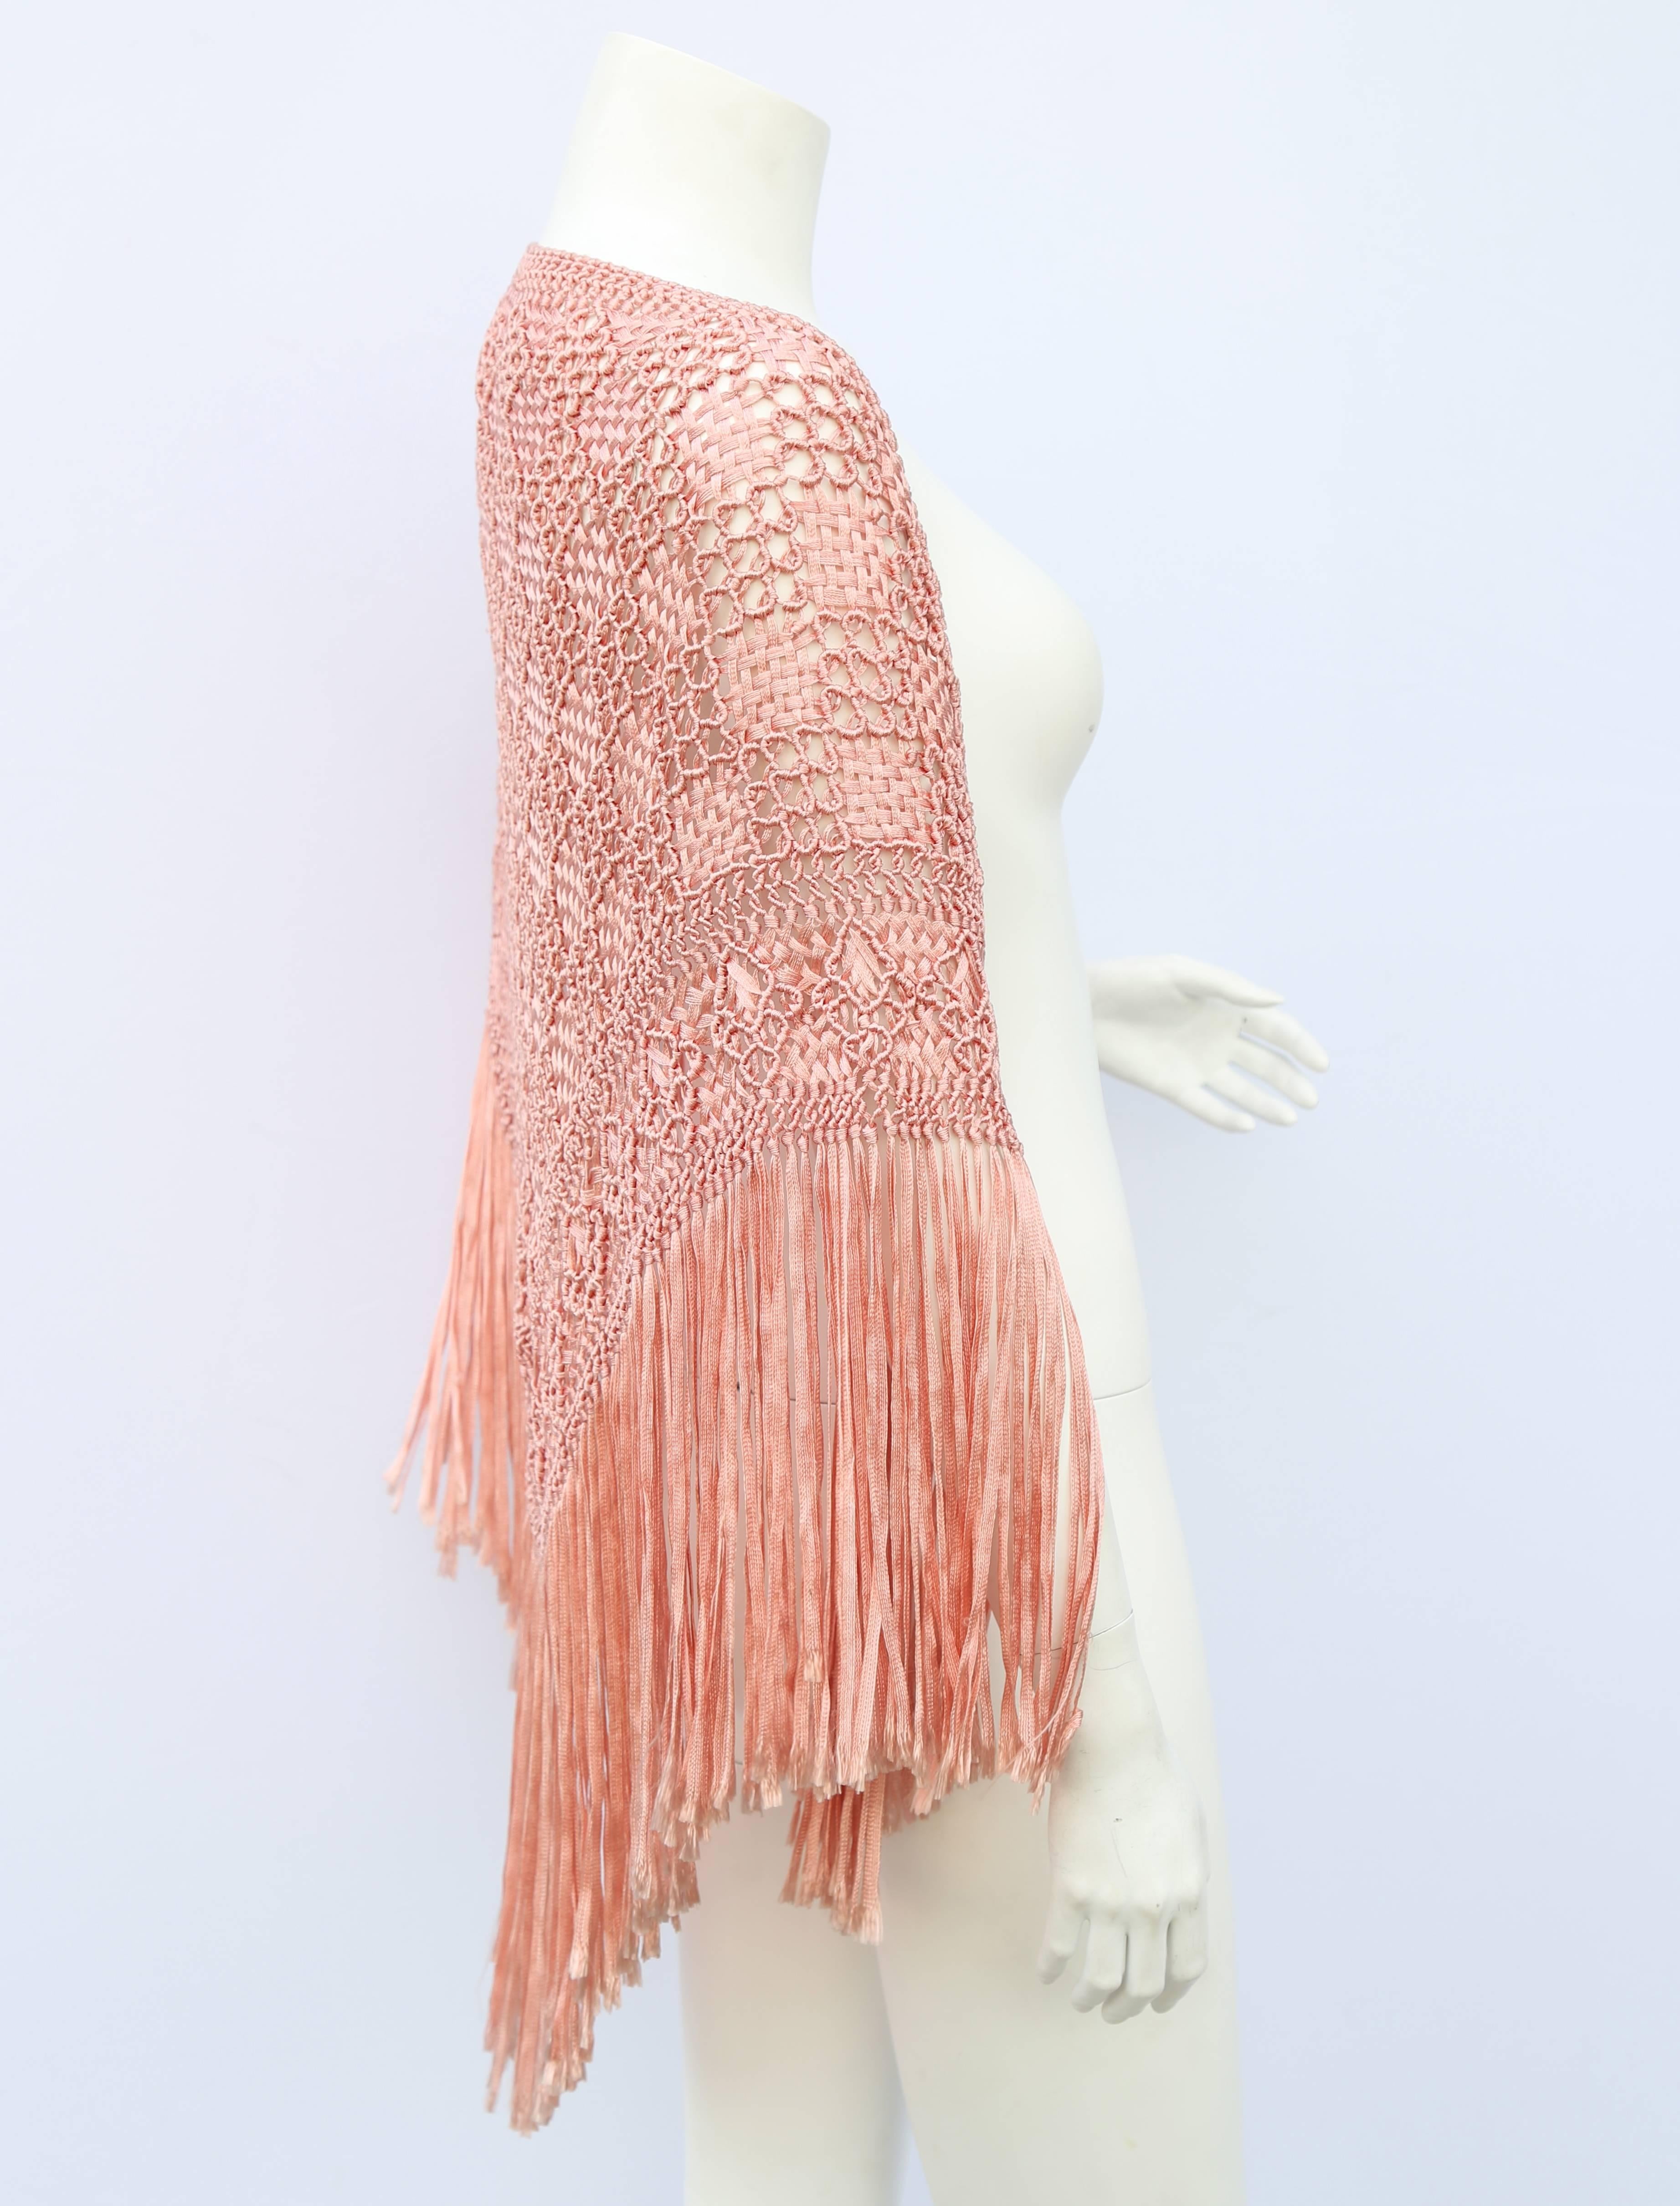 A vintage 1920s pale pink woven ribbon work shawl with ribbon tassels

Measurements taken flat in inches
Length - 45
Length – 20
Tassle length - 10